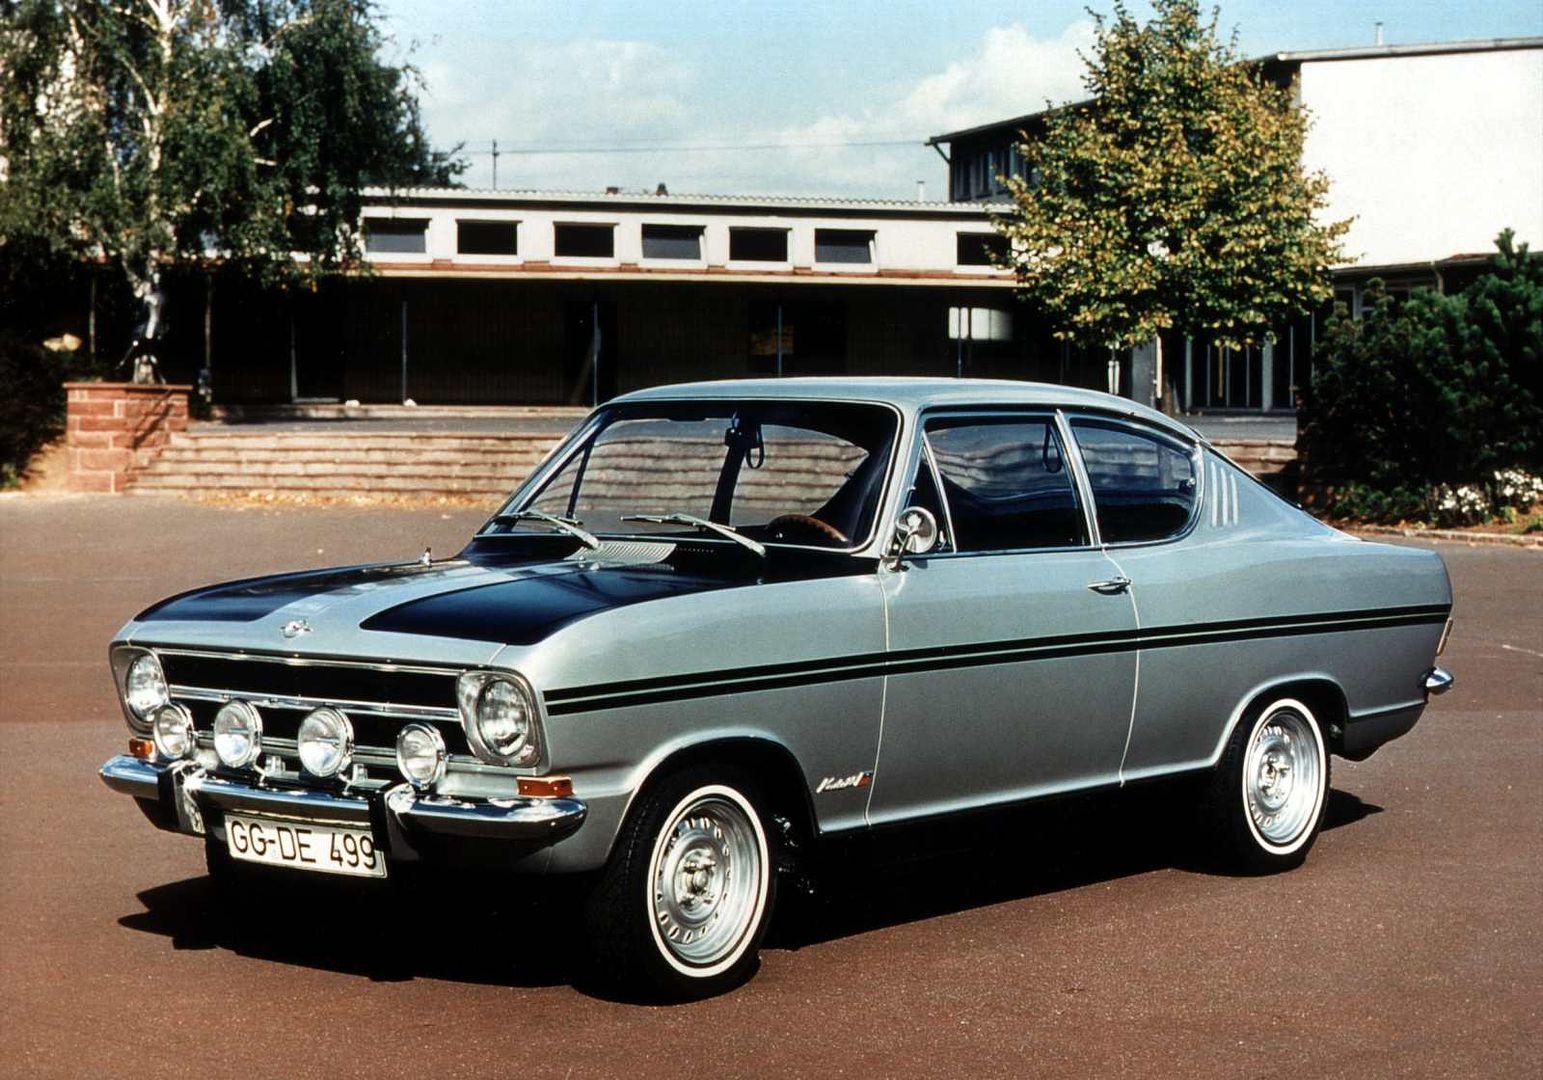 And an Opel Kadett B coupe for